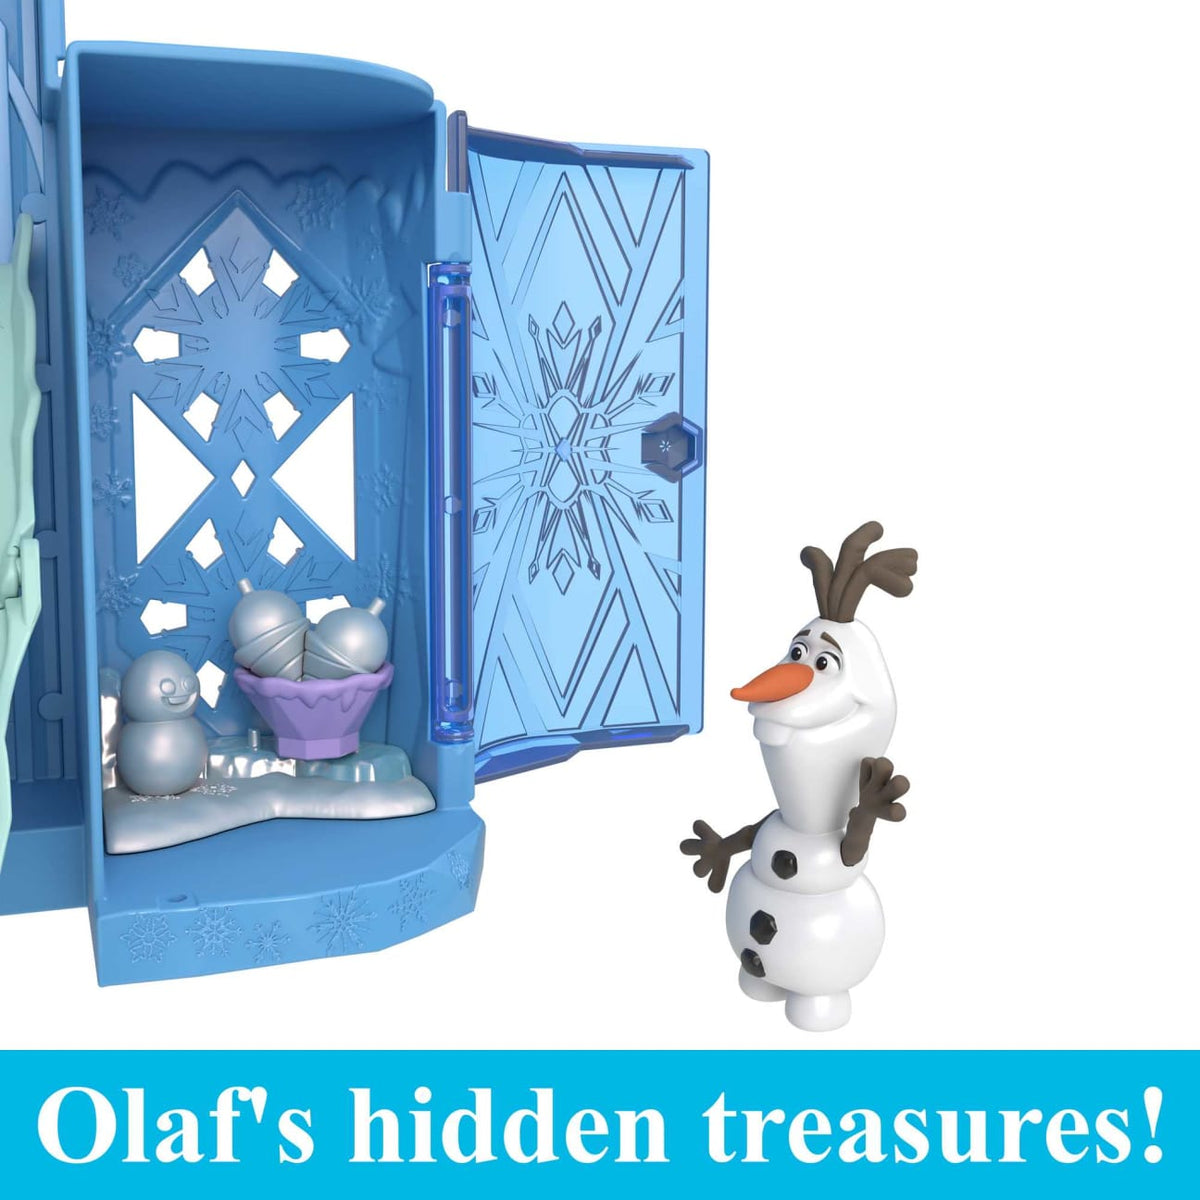 Disney Frozen Storytime Stackers Elsa&#39;s Ice Palace Playset